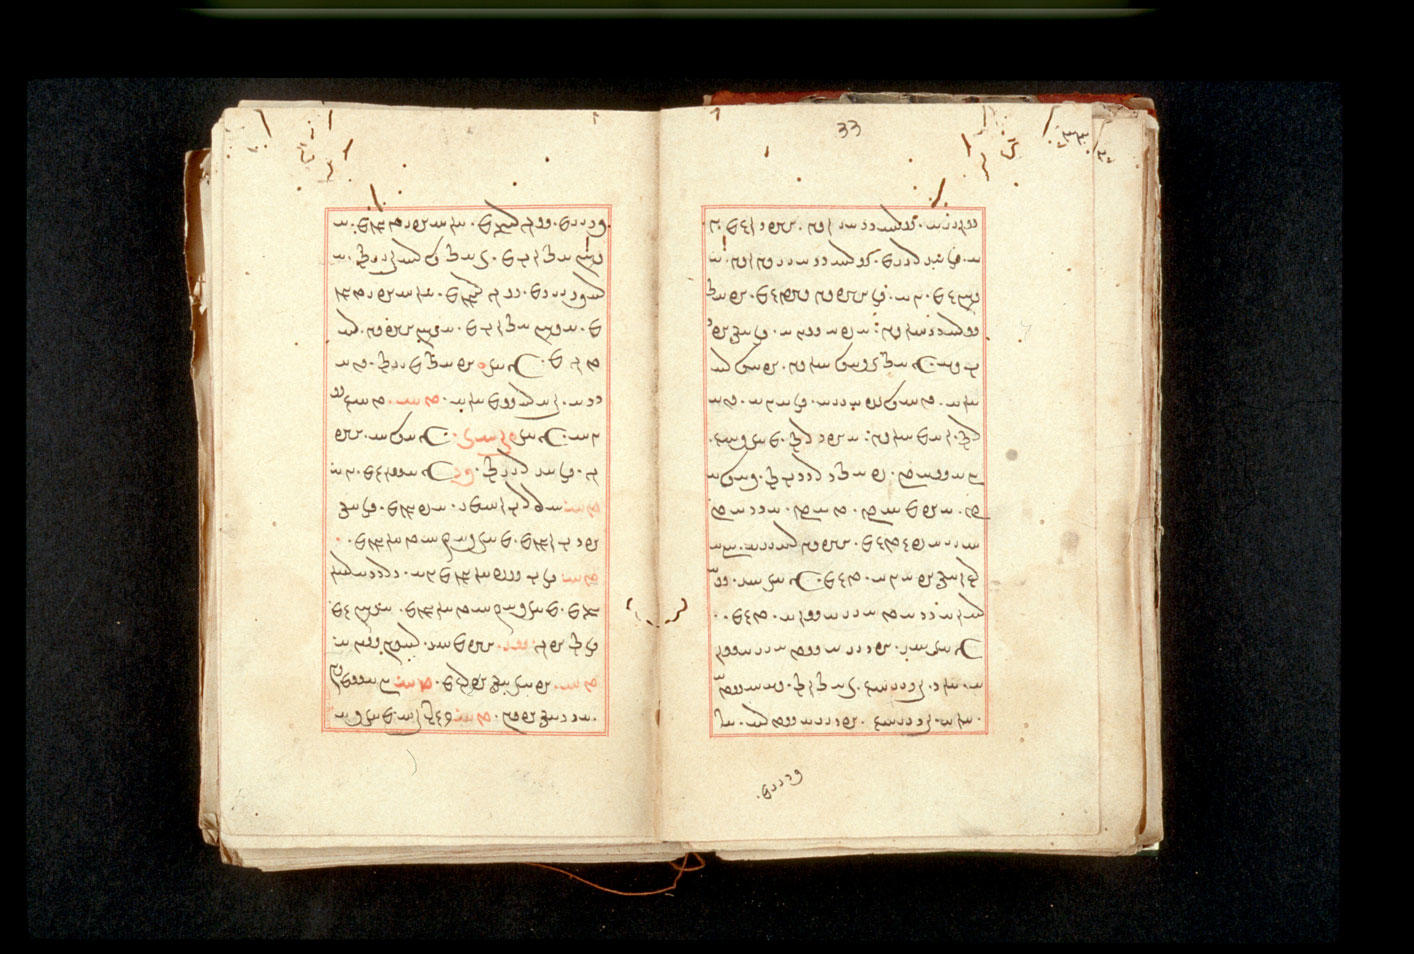 Folios 33v (right) and 34r (left)